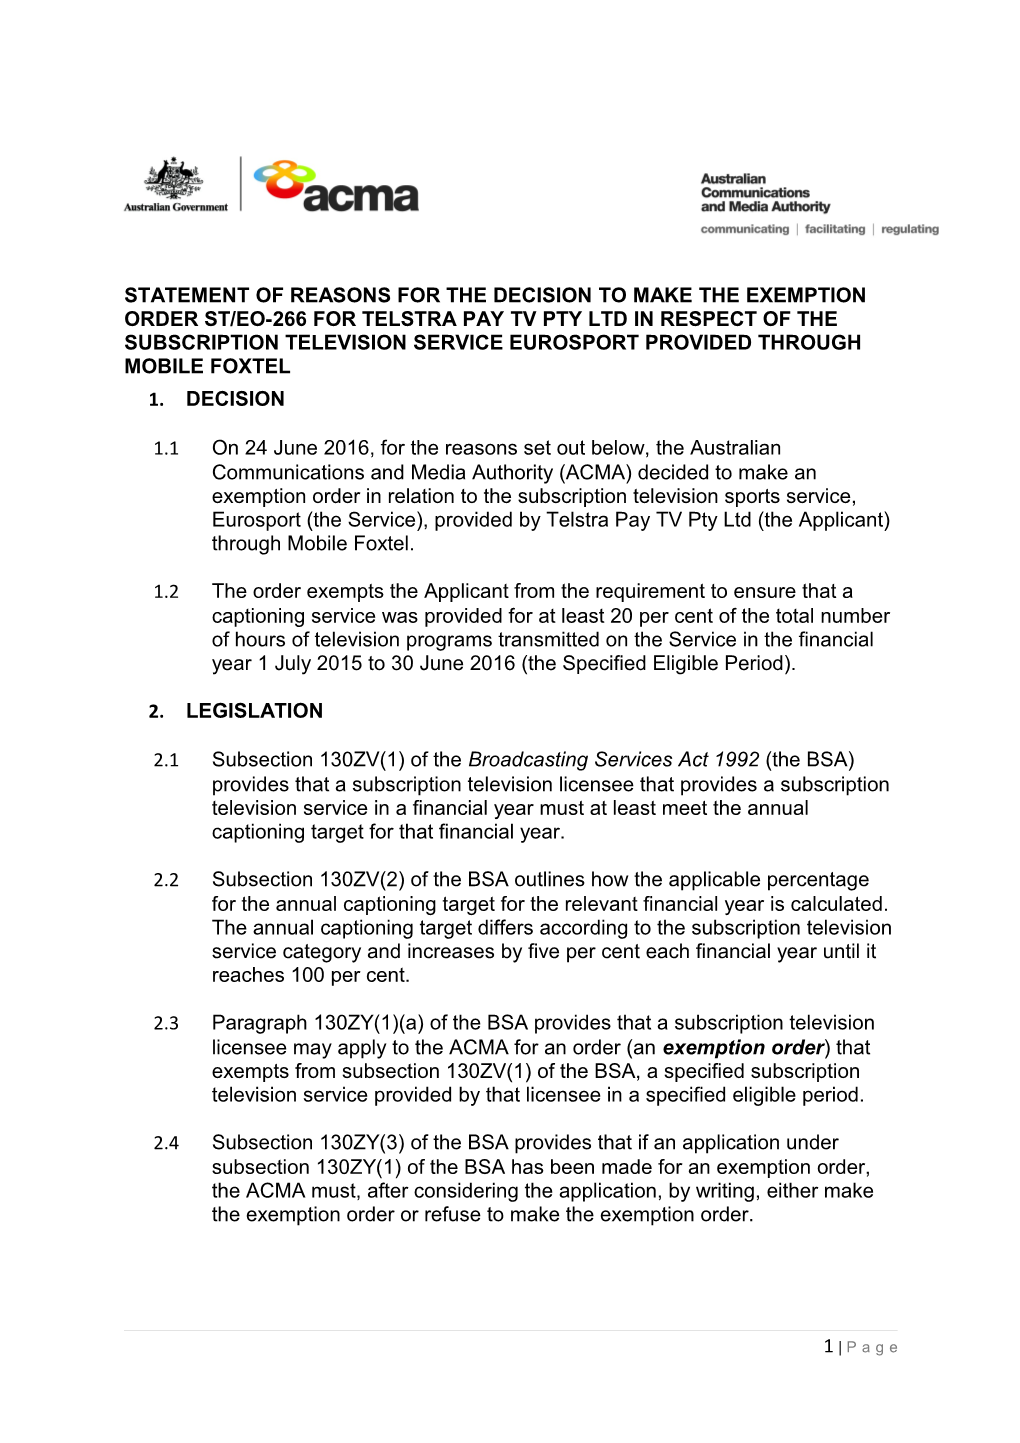 Statement of Reasons for the Decision to Make the Exemption Order St/Eo-266For Telstra